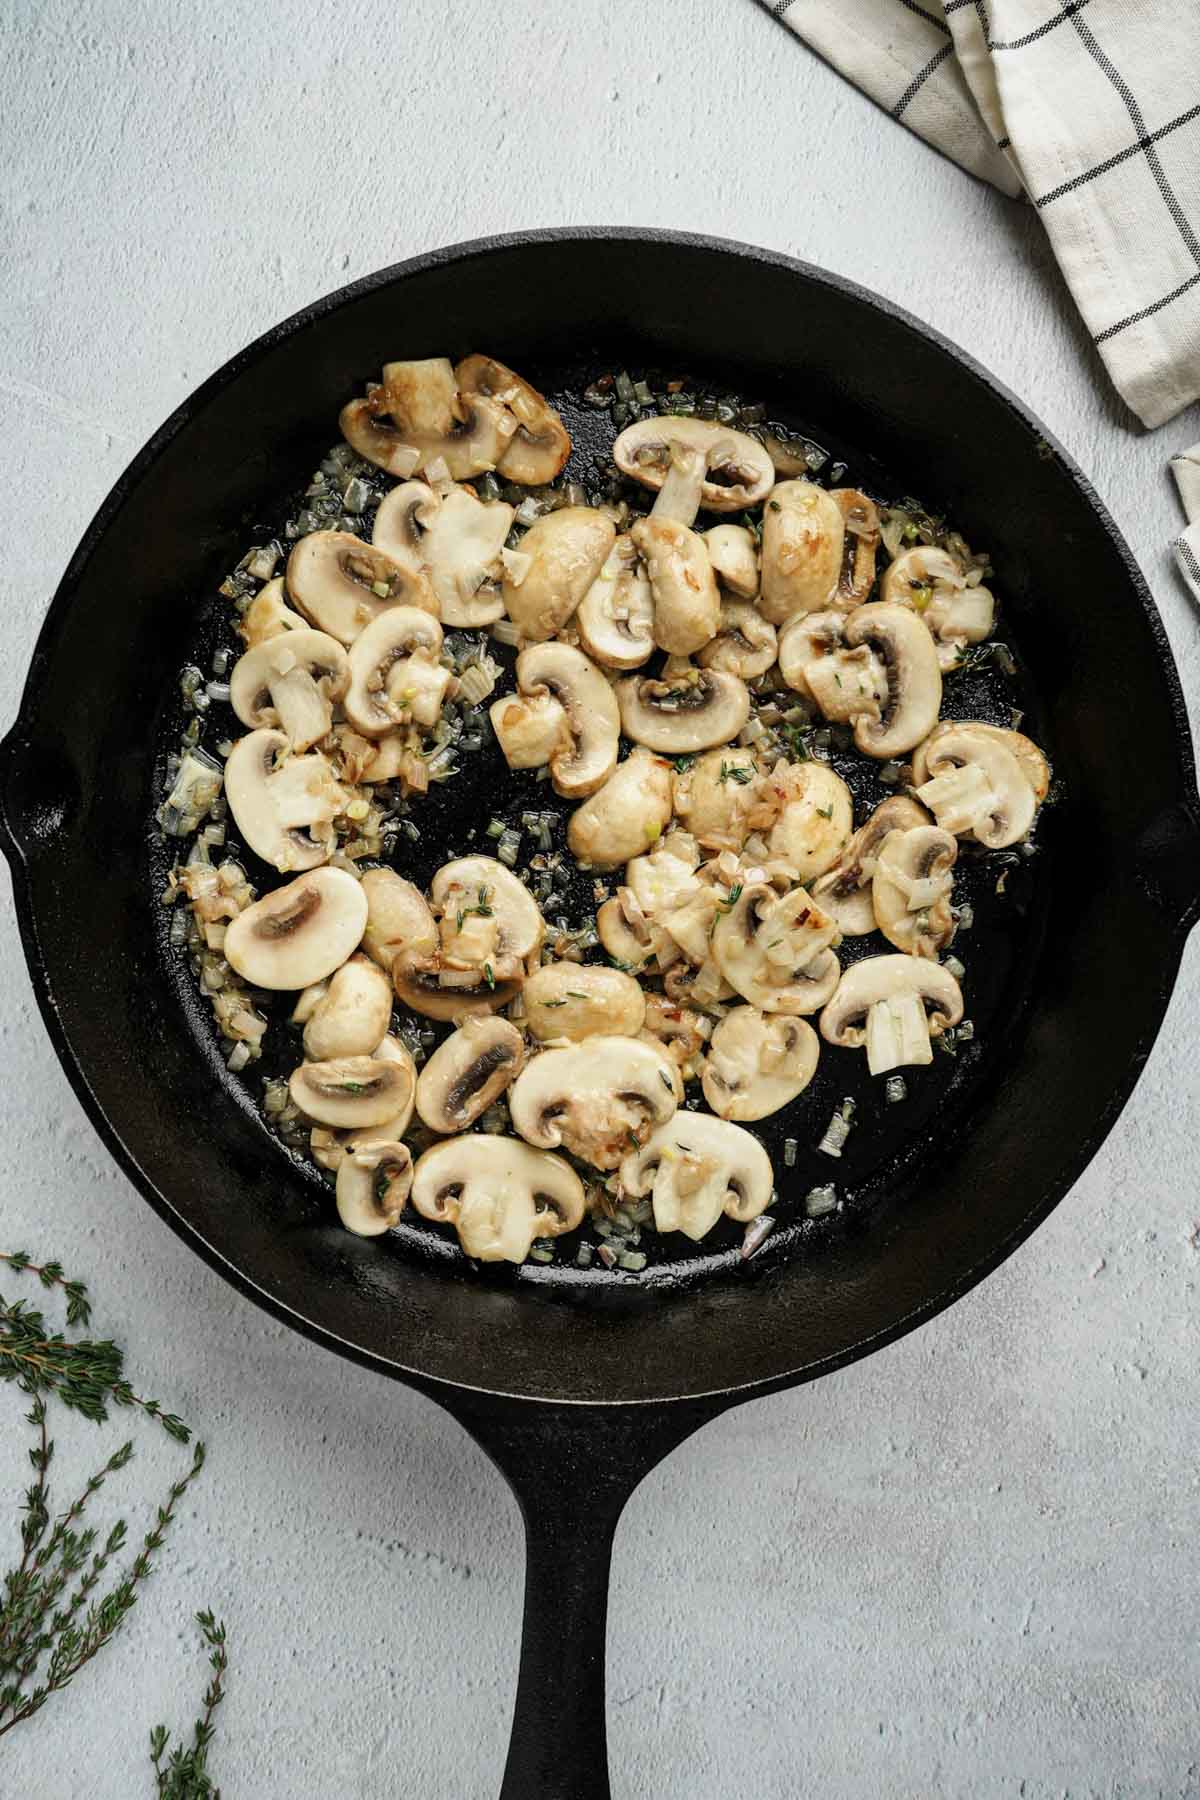 mushrooms being cooked in a skillet